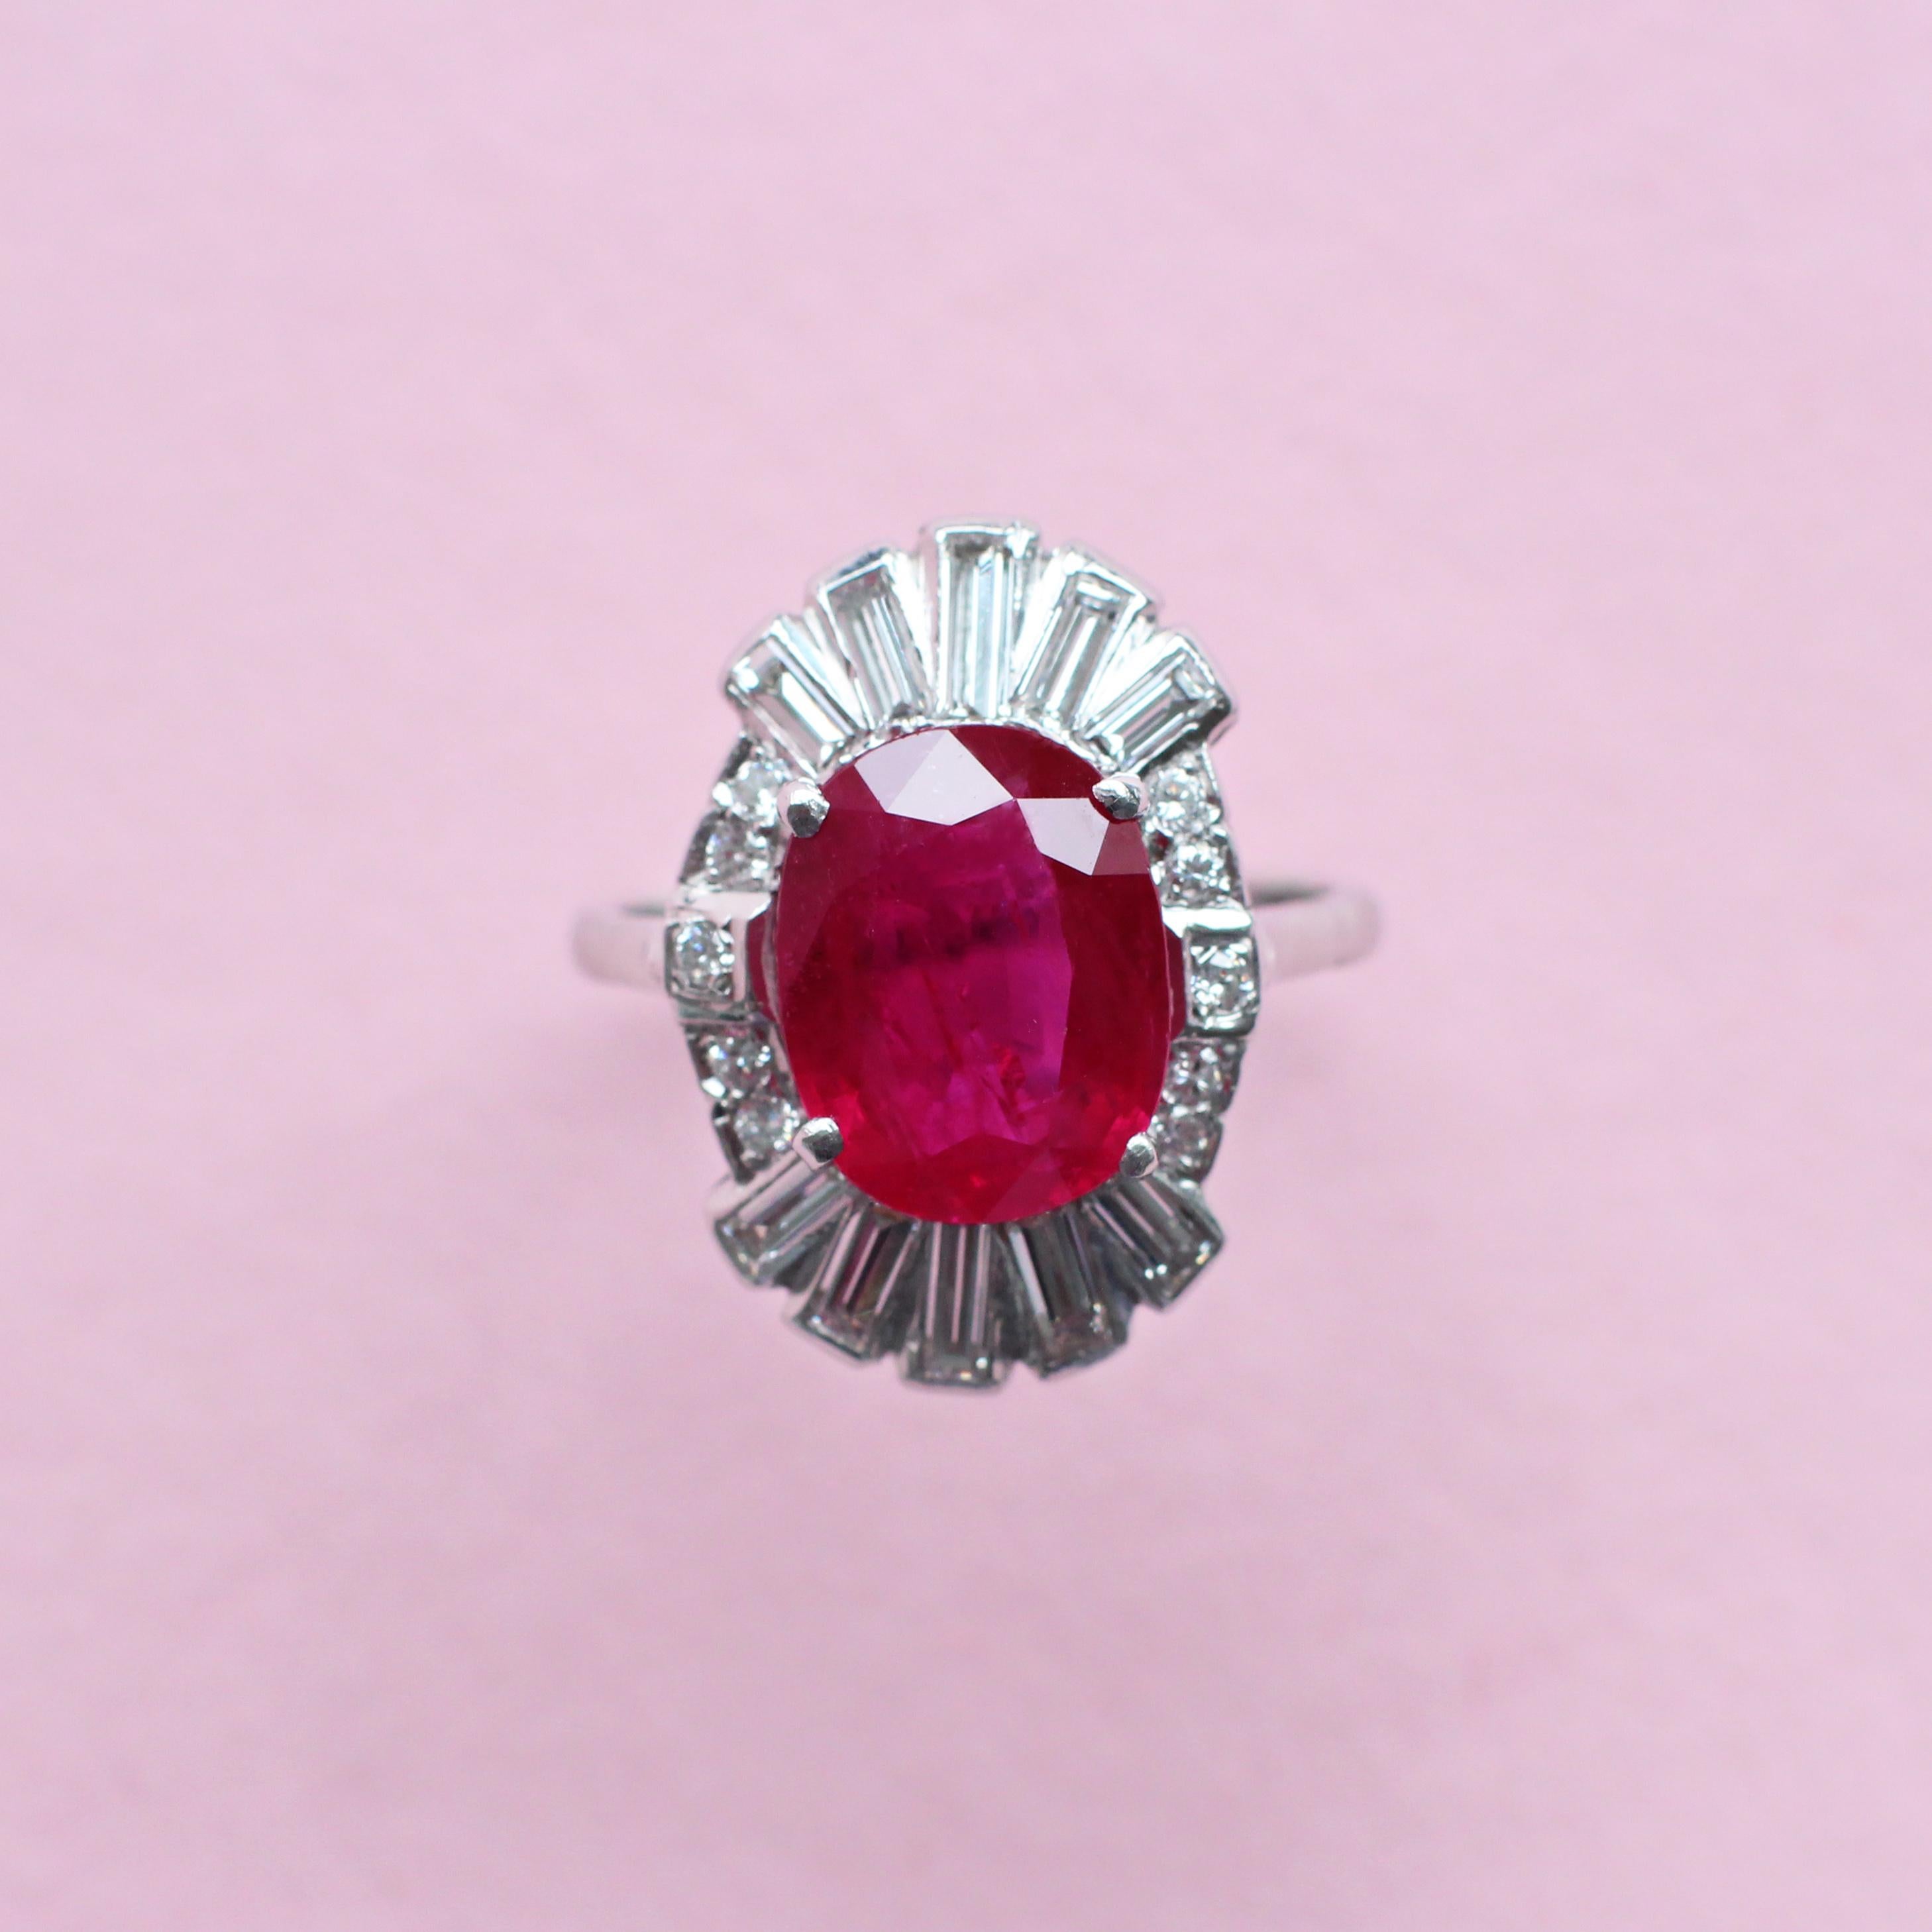 A truly exceptional piece from our London atelier, this vintage-style ring demands attention. At its centre is a large, bright red ruby in a timeless oval cut, embraced by a baguette and round brilliant diamond surround. Sparkling yet sophisticated,